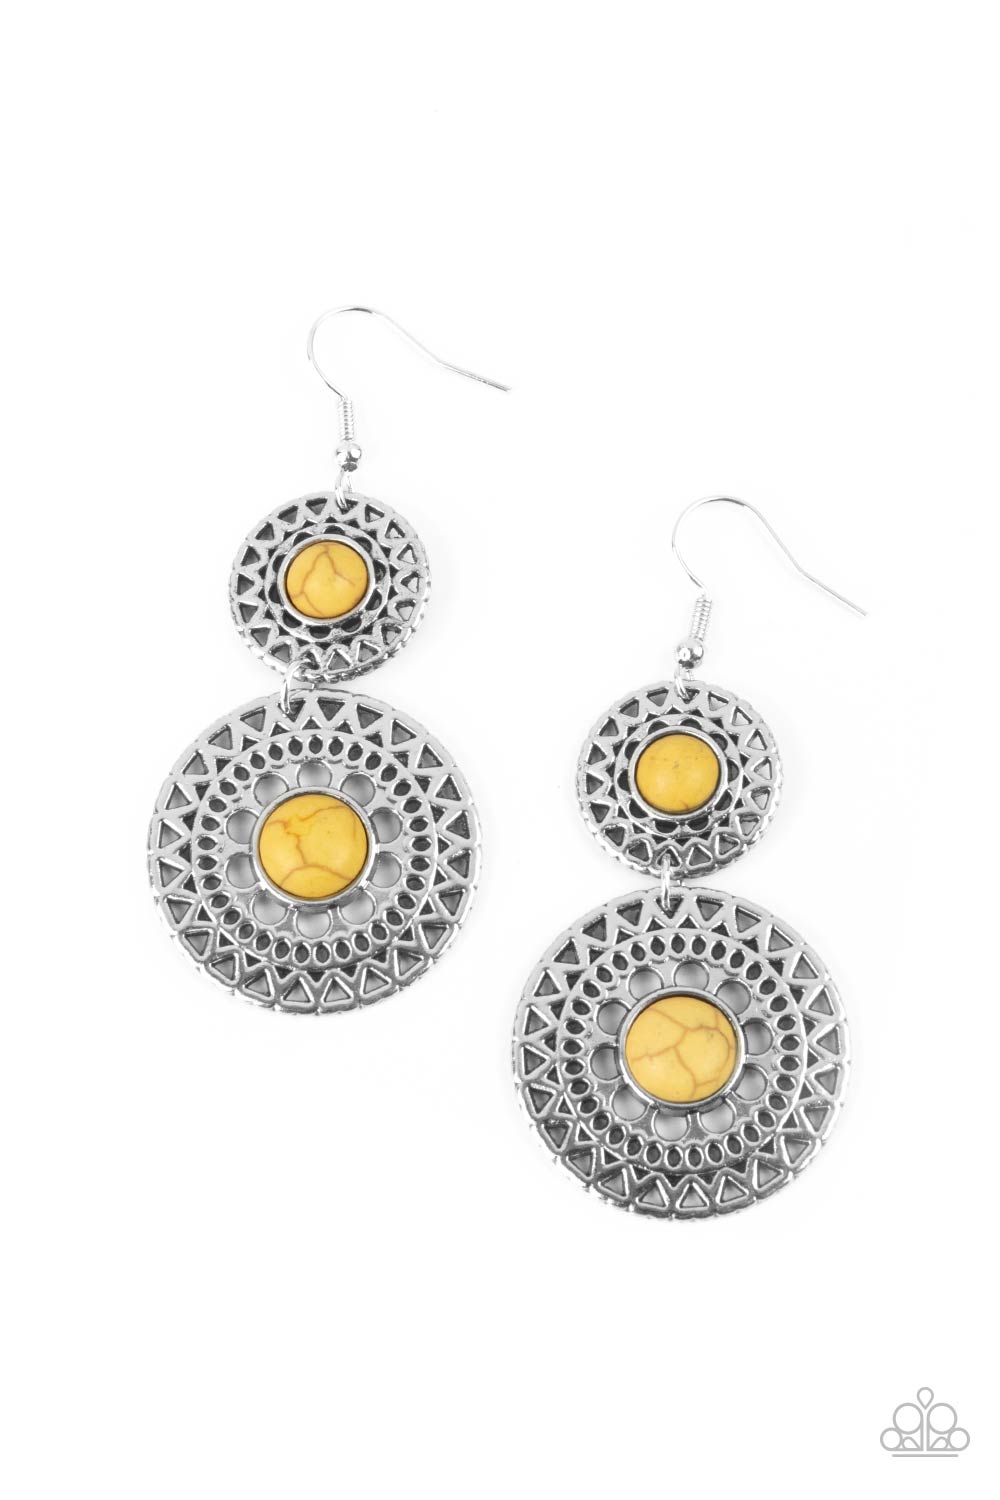 Paparazzi Accessories Sunny Sahara - Yellow Earrings - Lady T Accessories